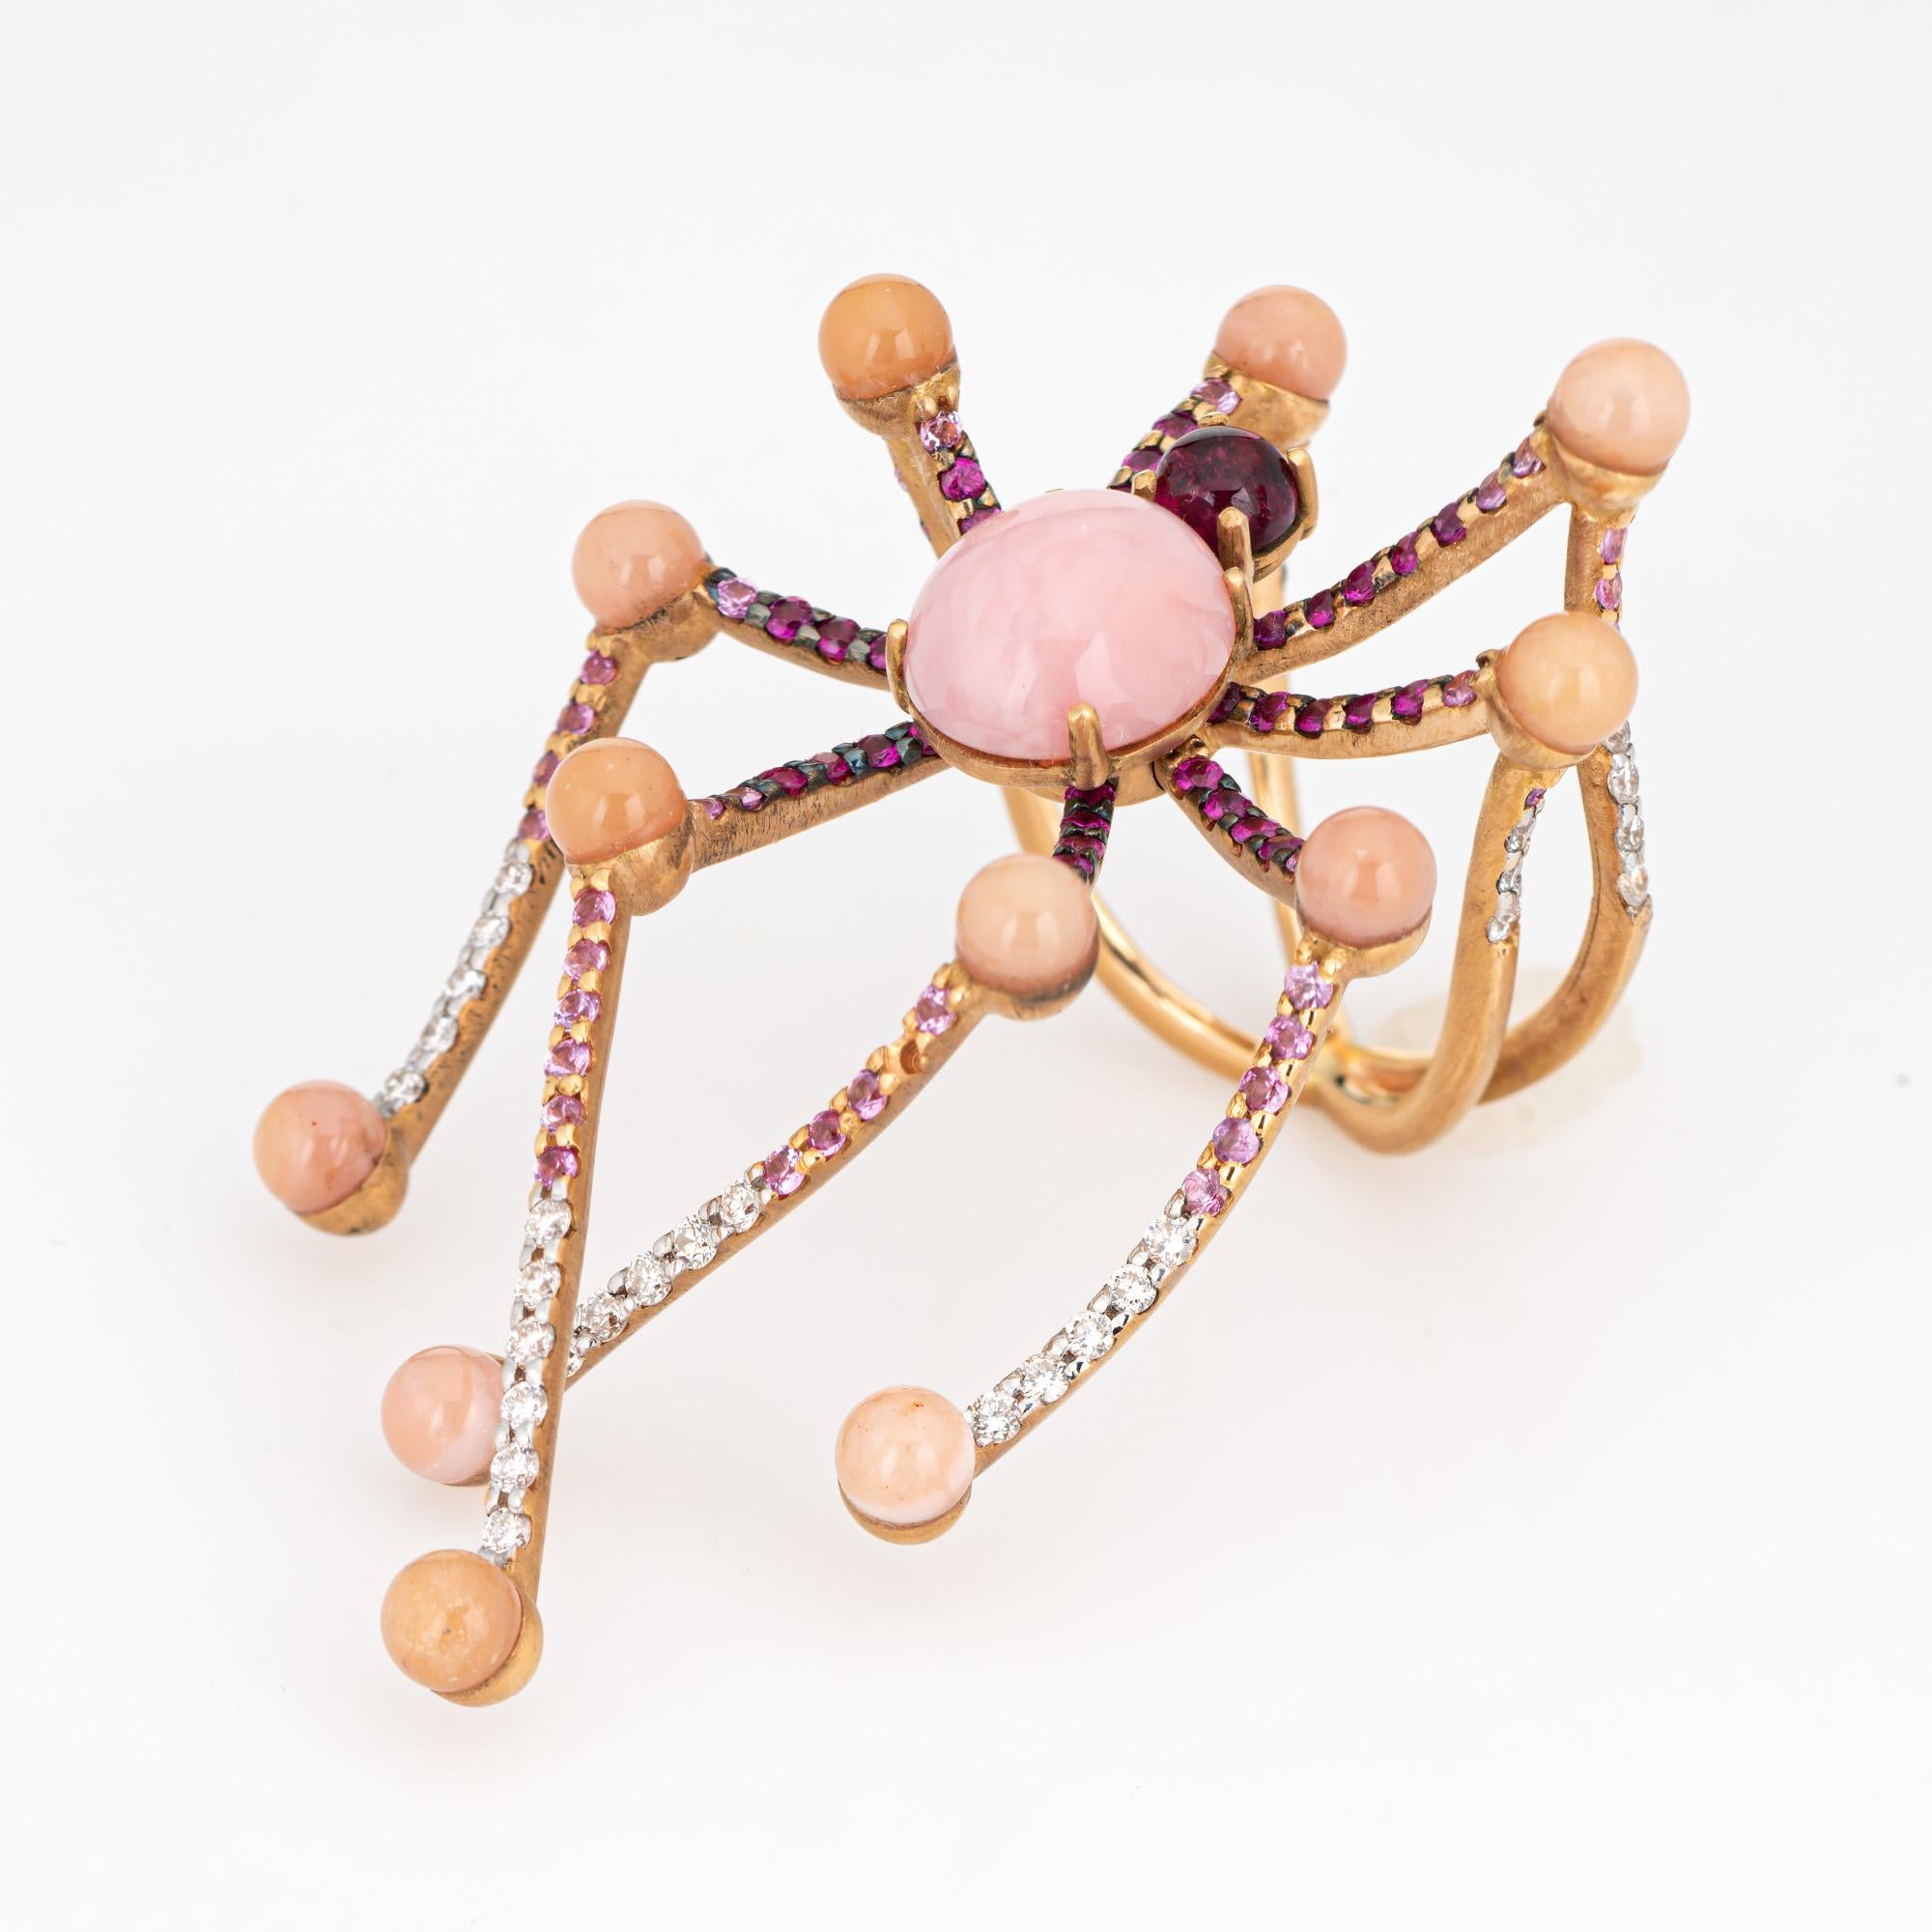 Distinct & stylish Vasari spider ring crafted in 18 karat yellow gold. 

Rubellite, pink opals and diamonds are set into the mount. The gemstones are in very good condition and free of cracks or chips.  

The elaborate spider features four